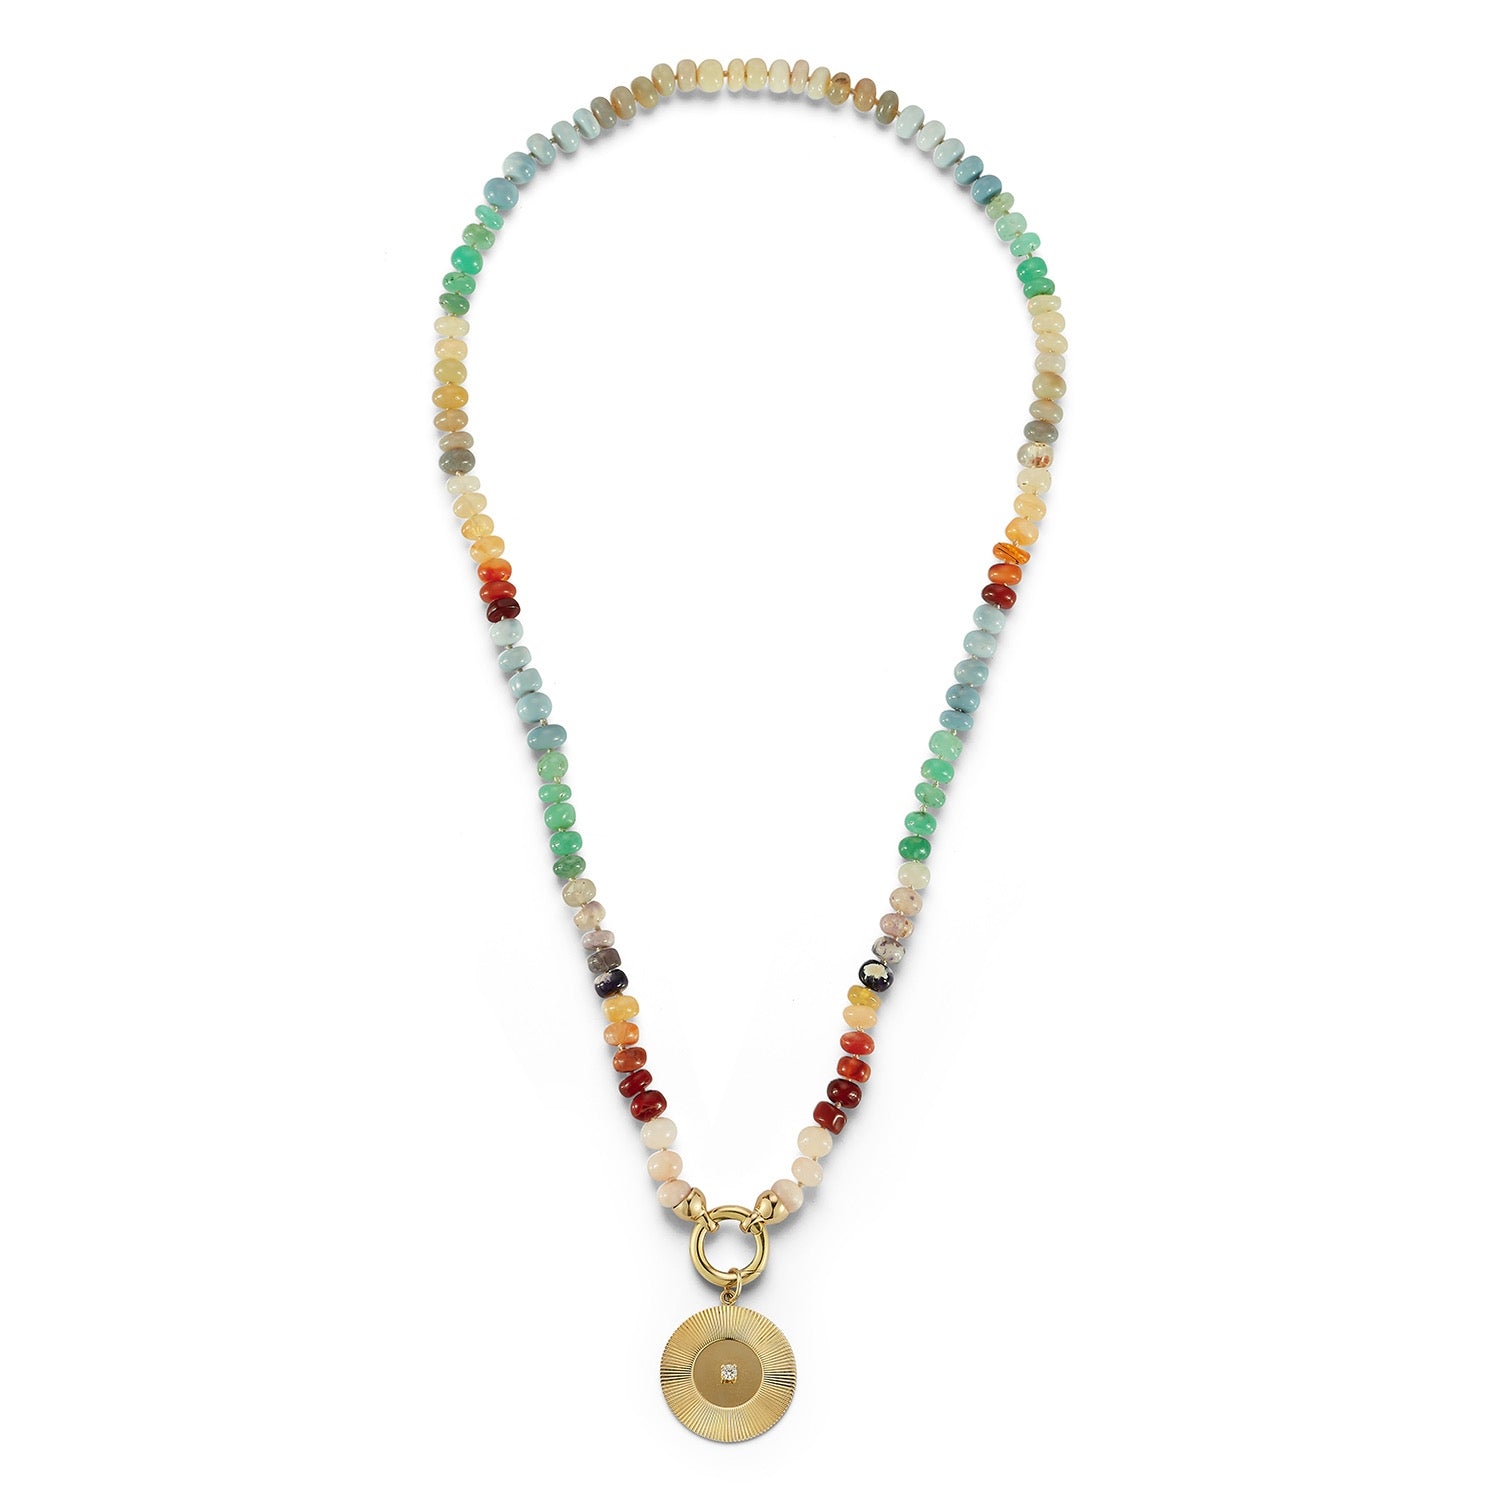 Multicolor Opal Necklaces with Charm Clasp